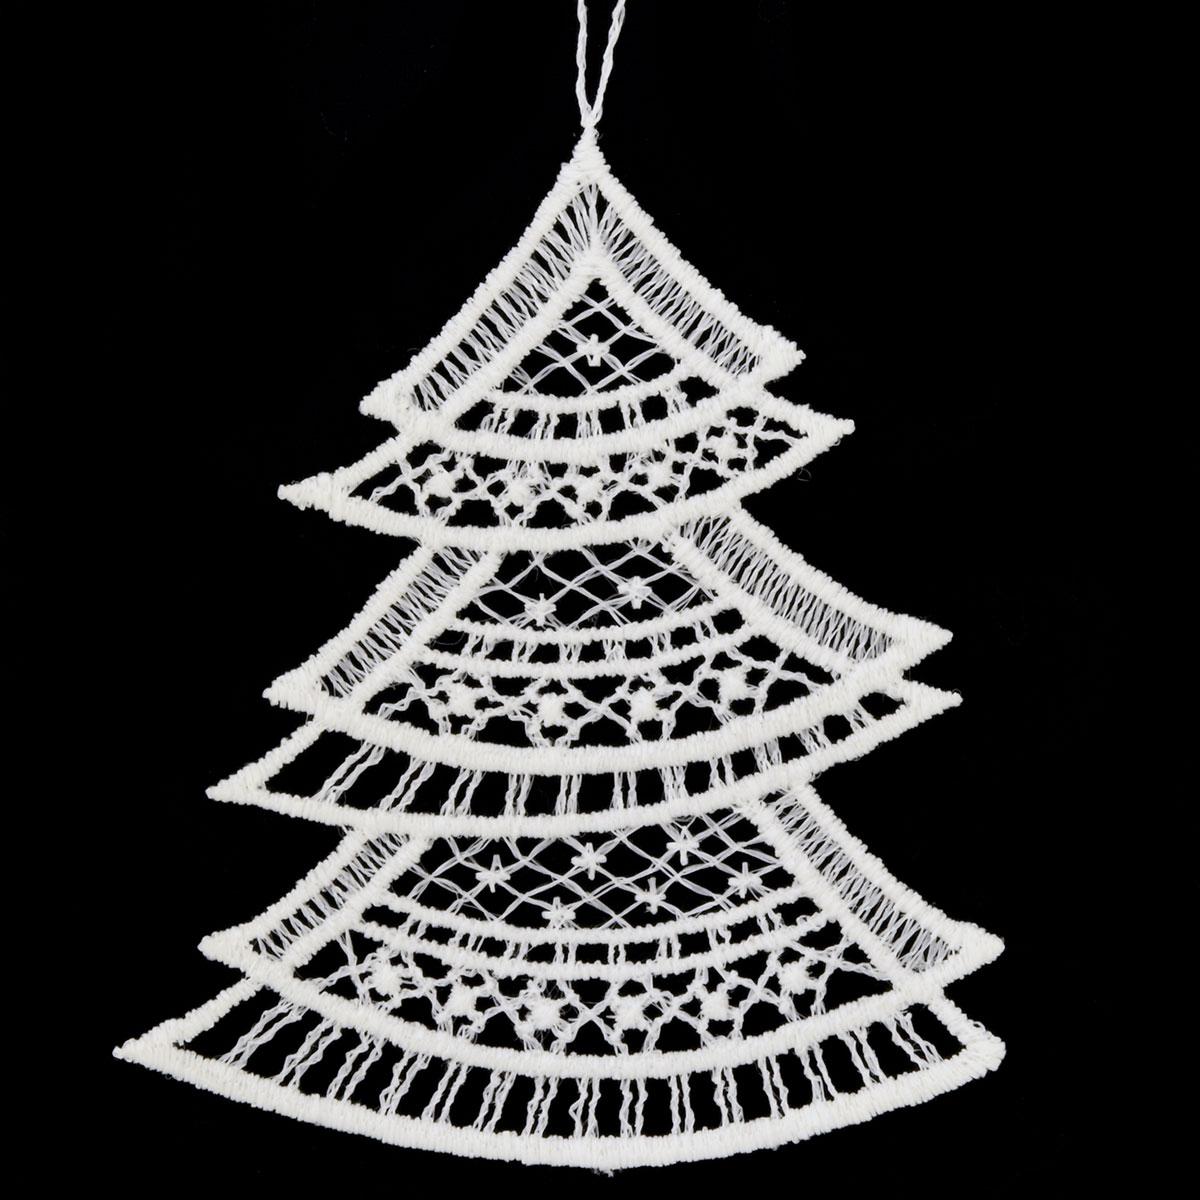 Stitched Lace Tree Ornament